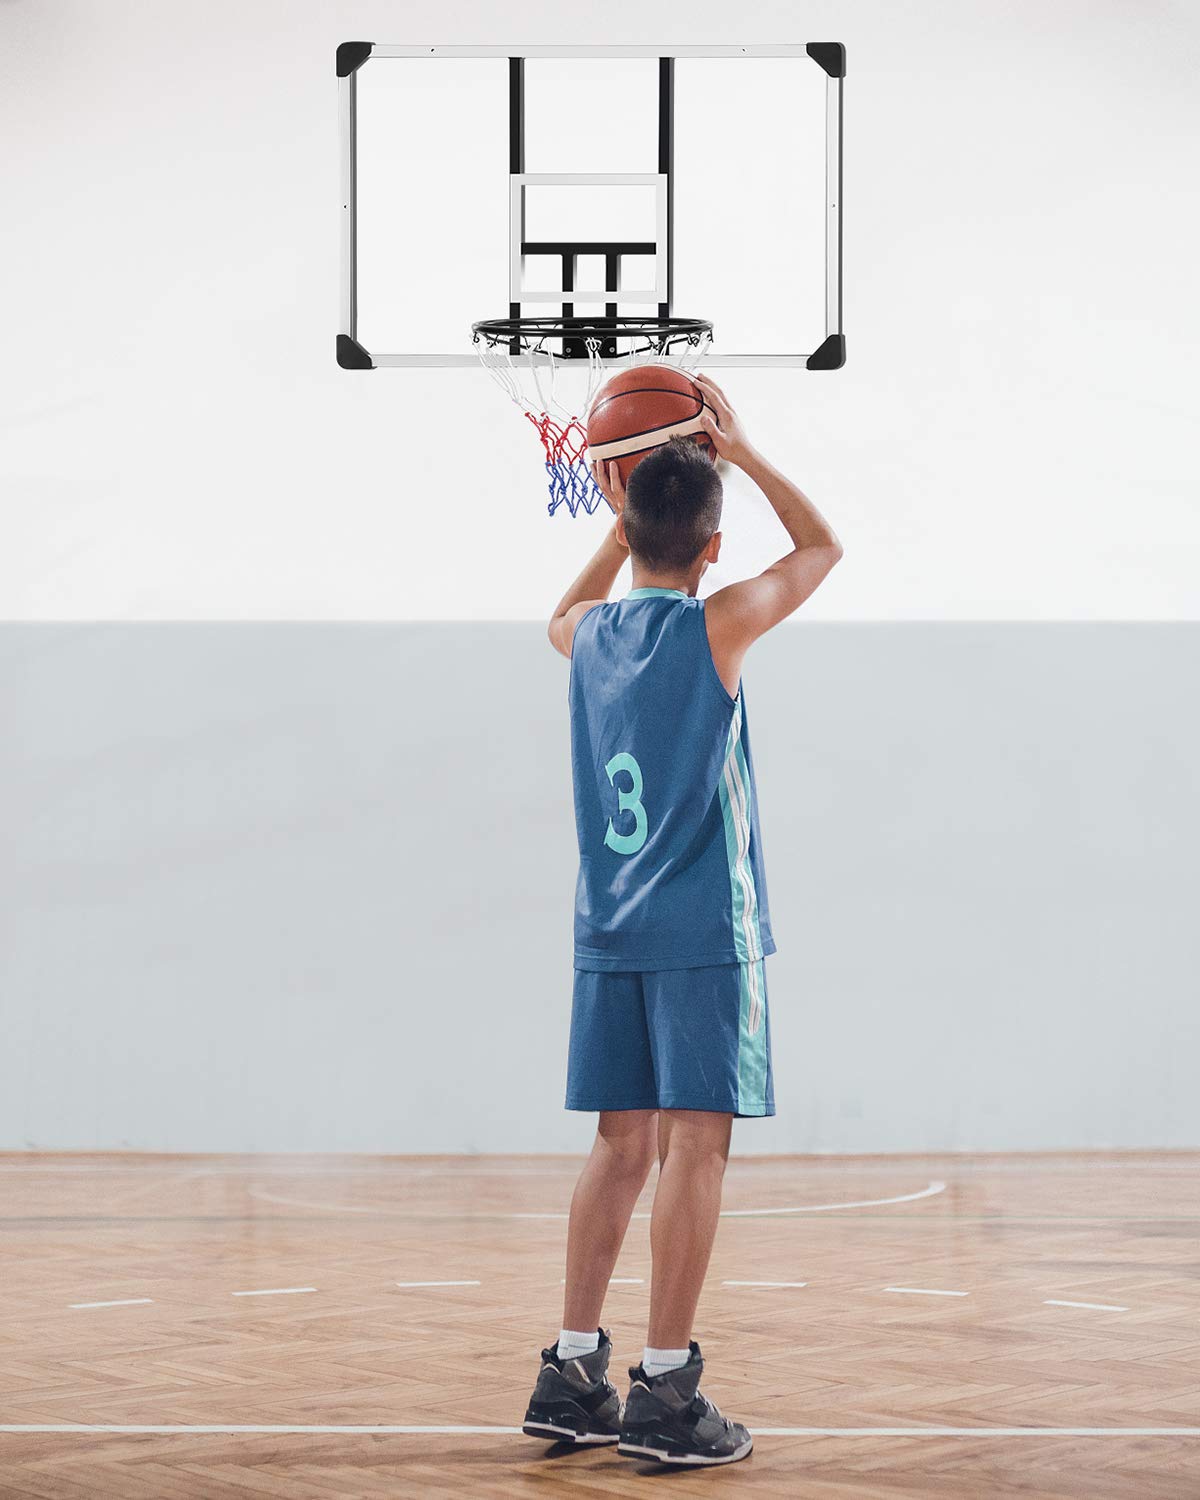 Load image into Gallery viewer, MaxKare 44 In. Basketball Backboard with Wall-Mount Hoops and Goals Rim Combo Kit and Shatterproof Polycarbonate Board and All-Steel Rustproof Frame and for Standard No.7 Balls
